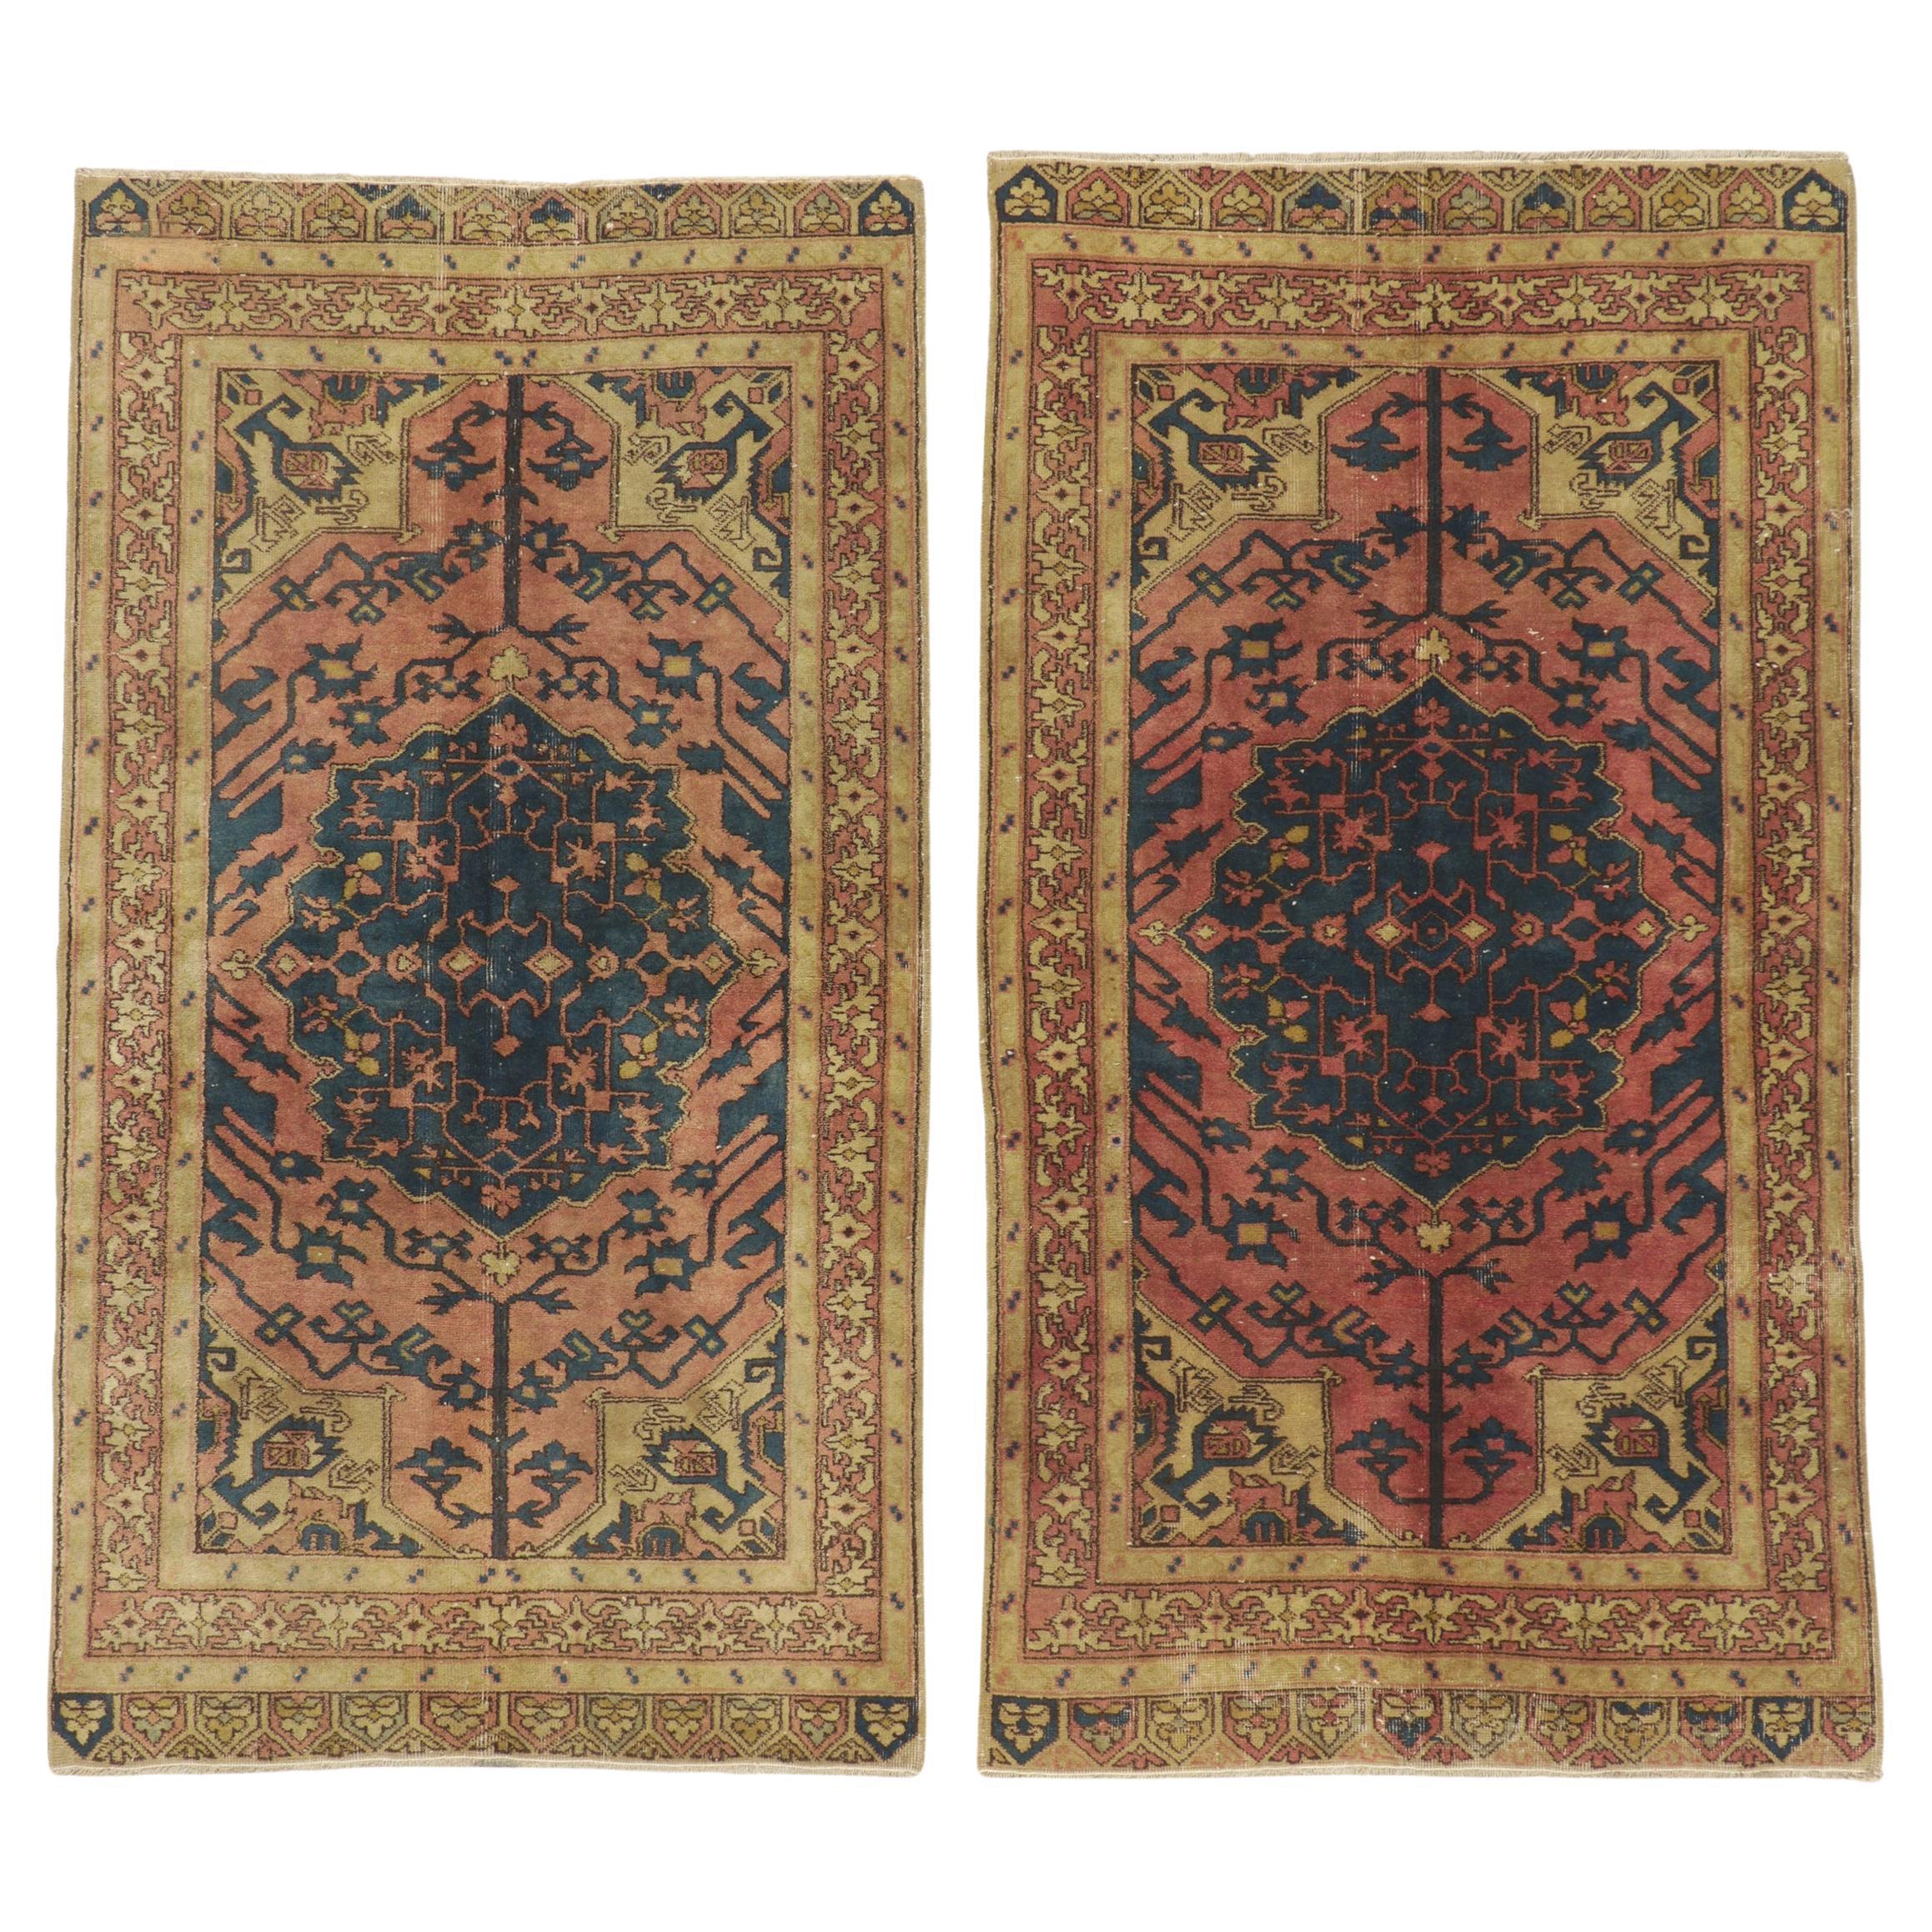 Pair of Matching Vintage Turkish Sivas Rugs with Rustic Earth-Tone Colors For Sale